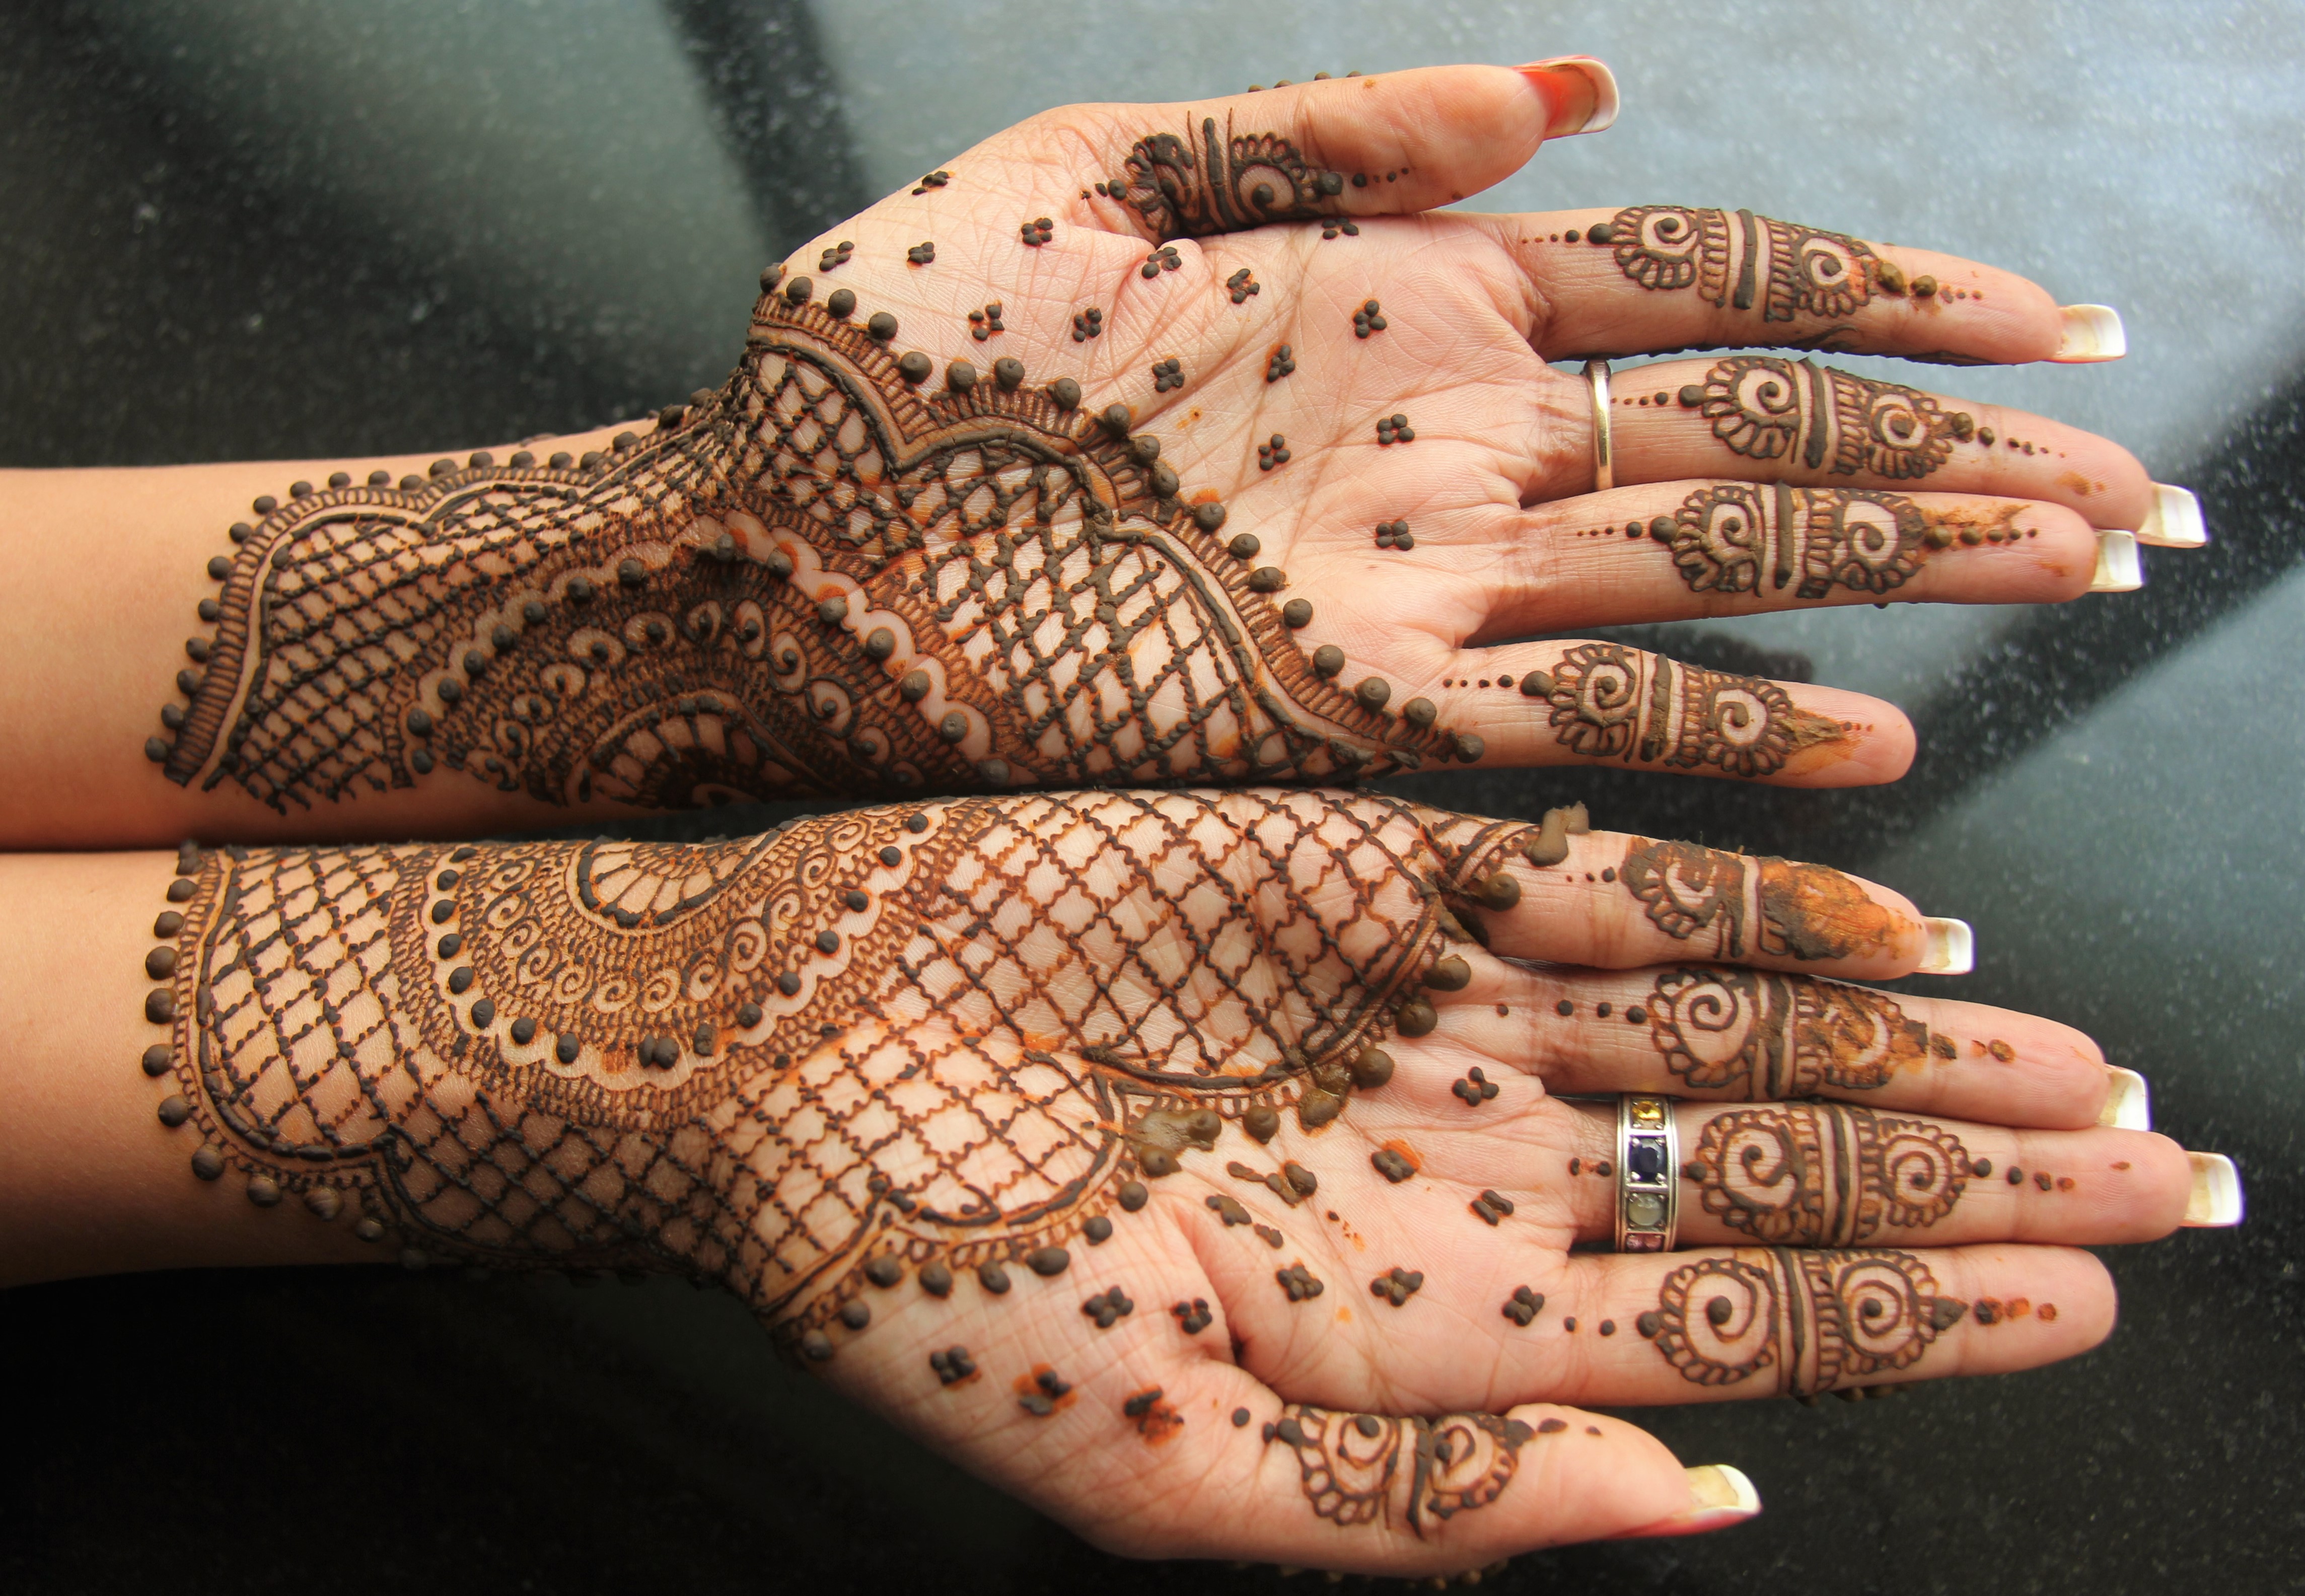 2. The Cultural Significance of Henna Tattoos - wide 2